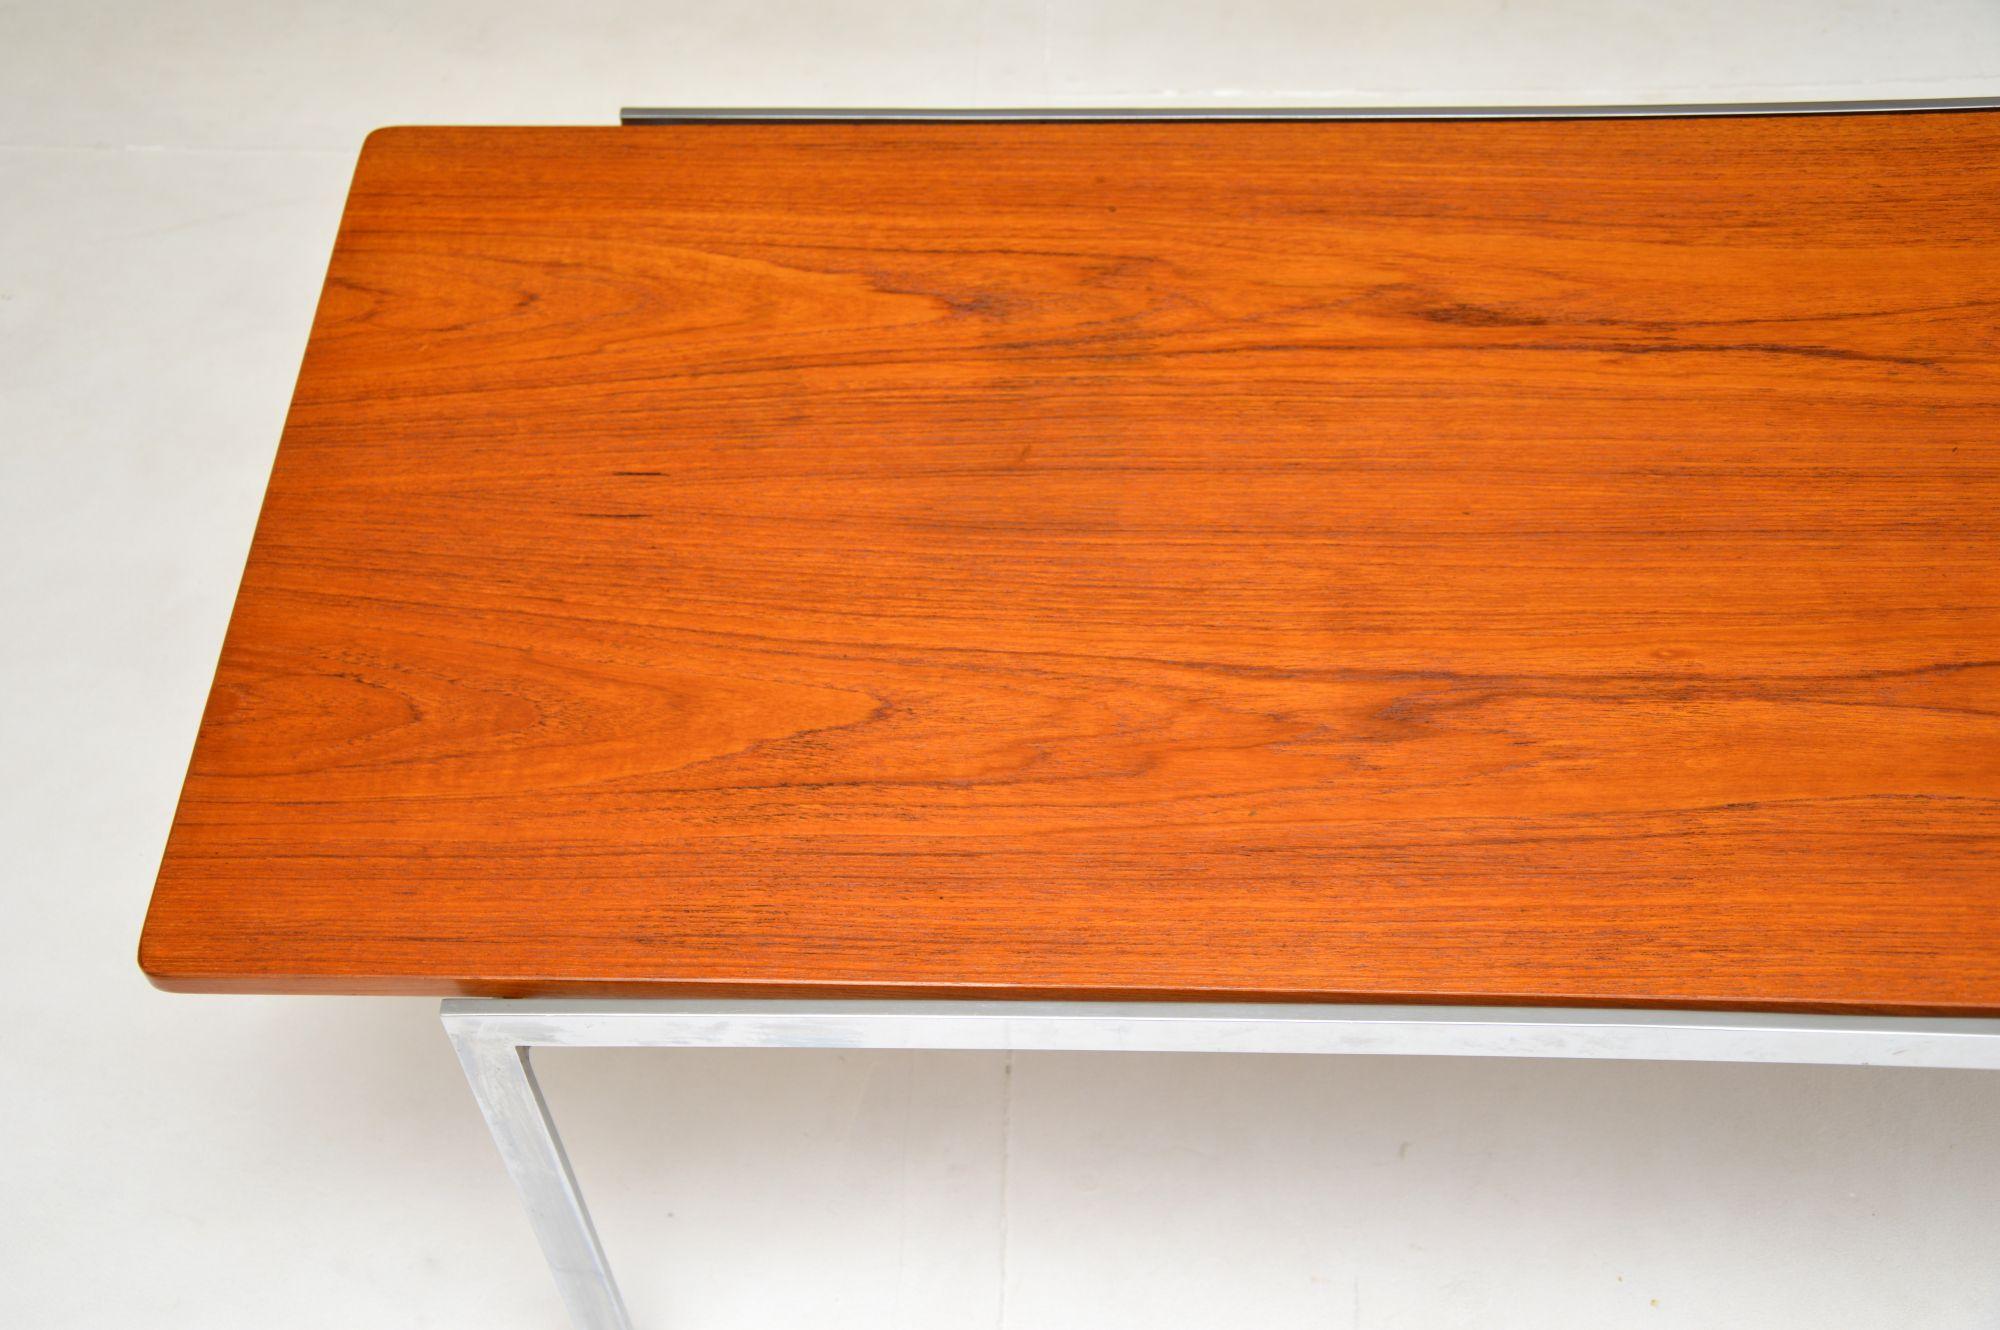 Danish Vintage Teak and Chrome Coffee Table by Arne Jacobsen For Sale 1